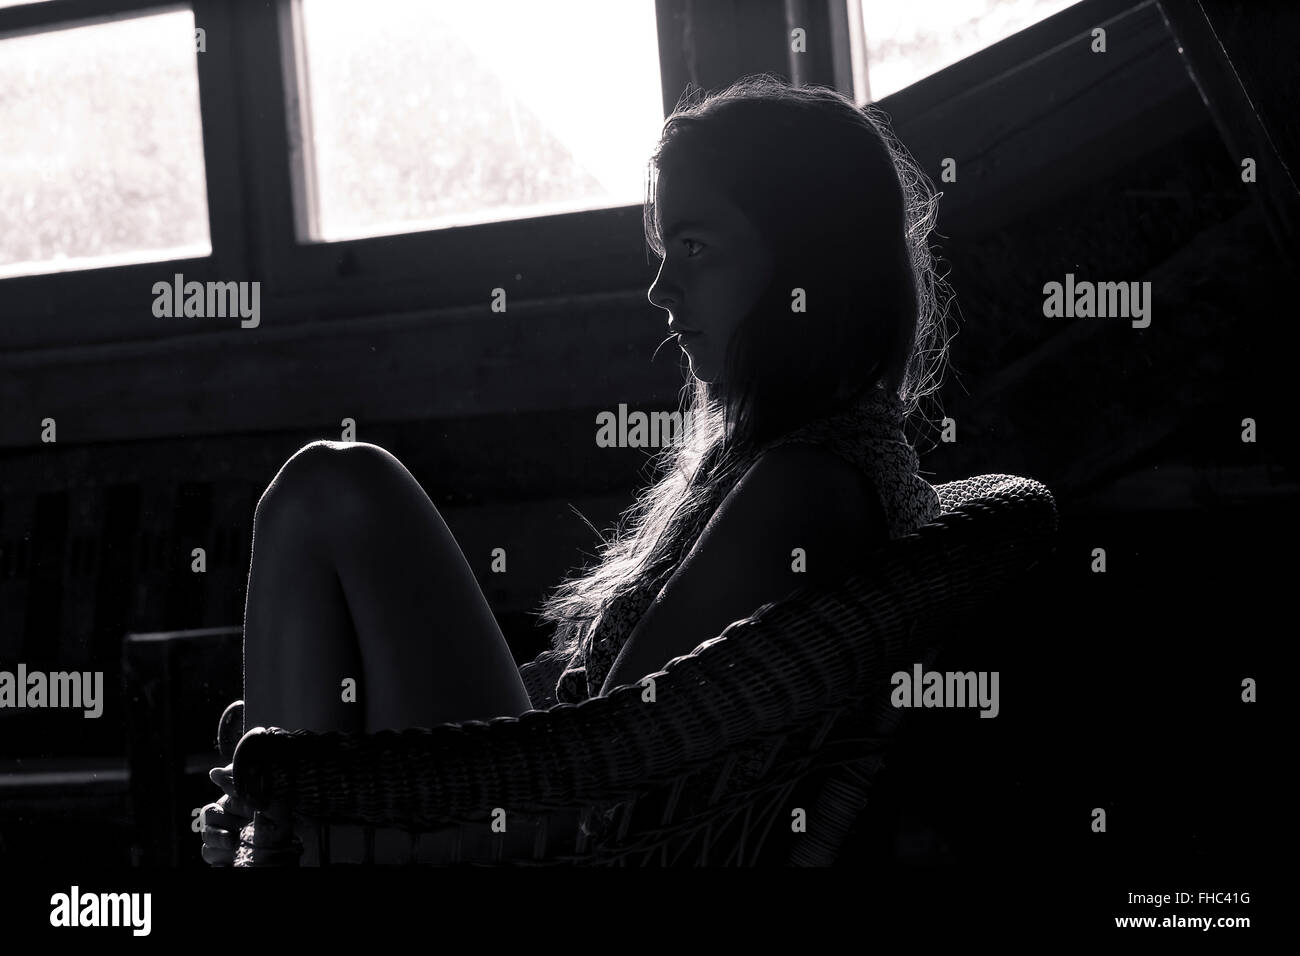 bw shot of a profile silhouette of a teenage girl Stock Photo